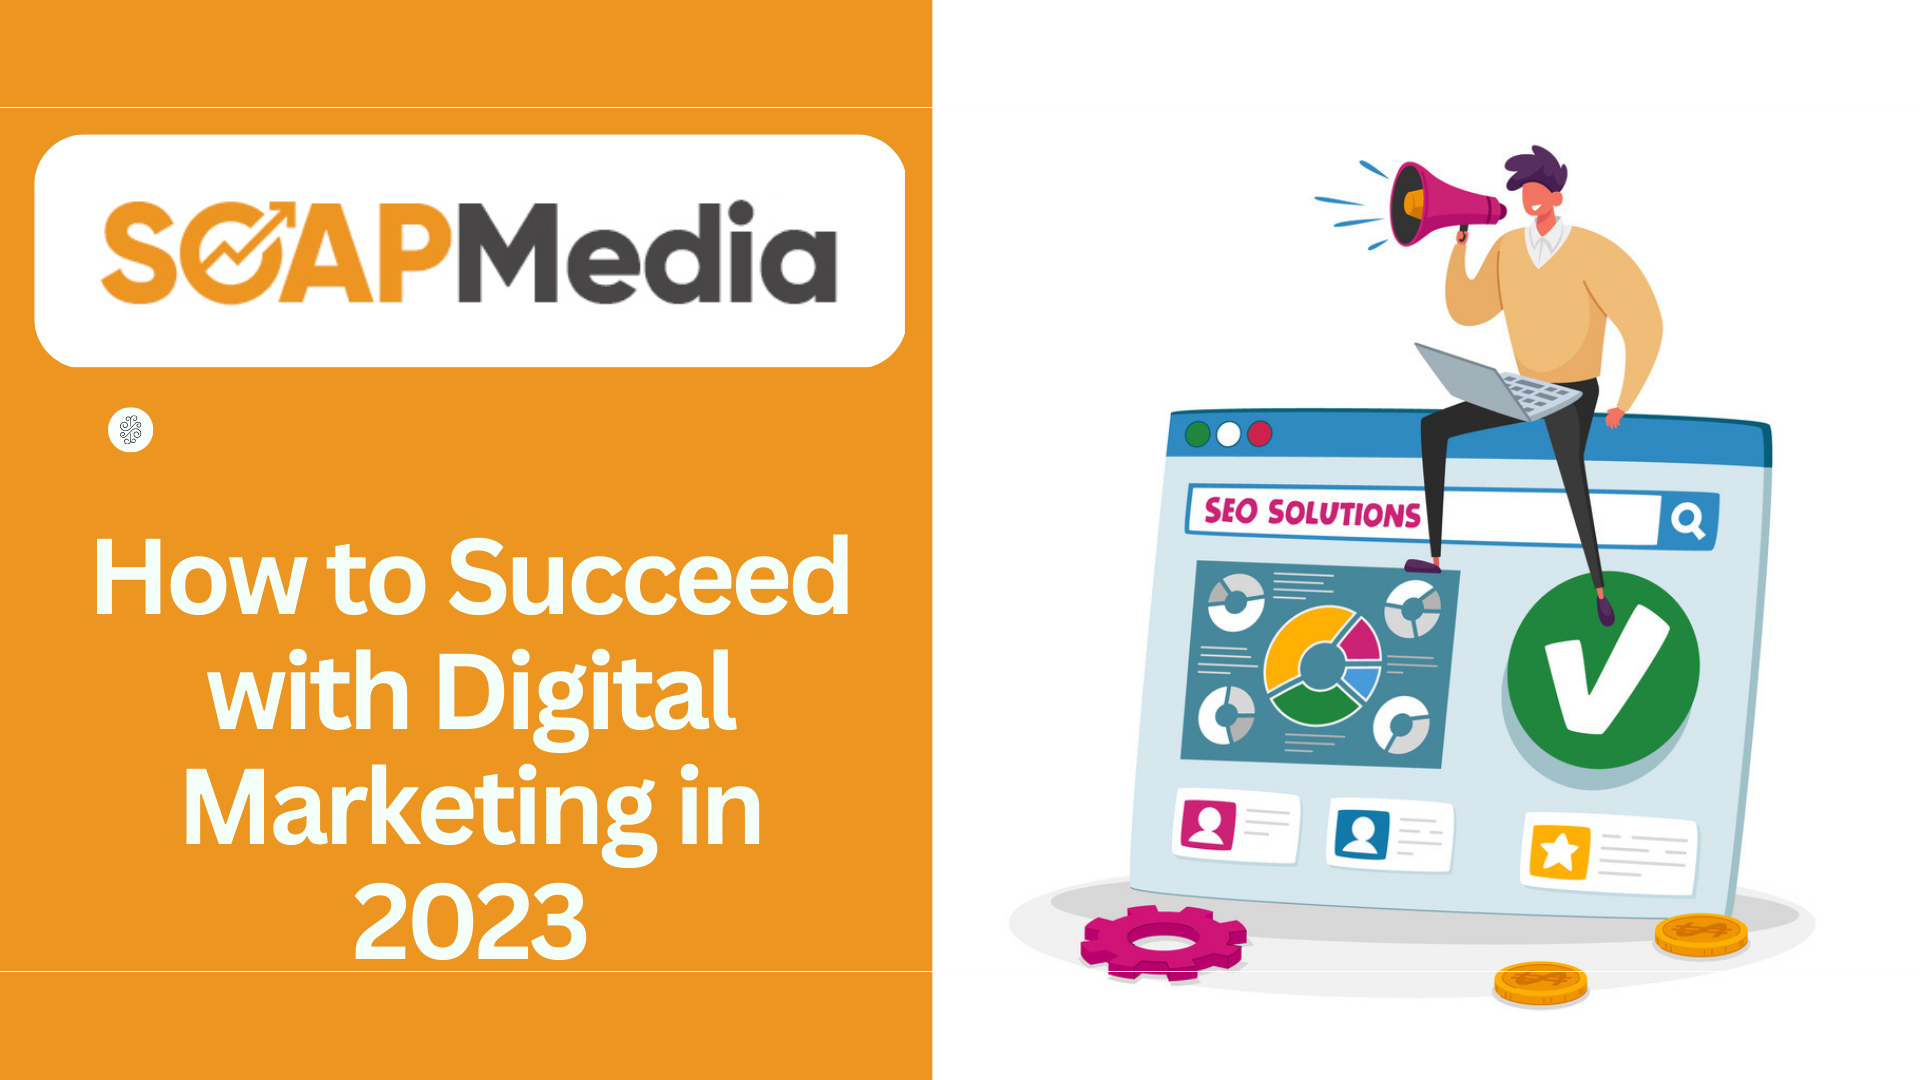 How to Succeed with Digital Marketing in 2023